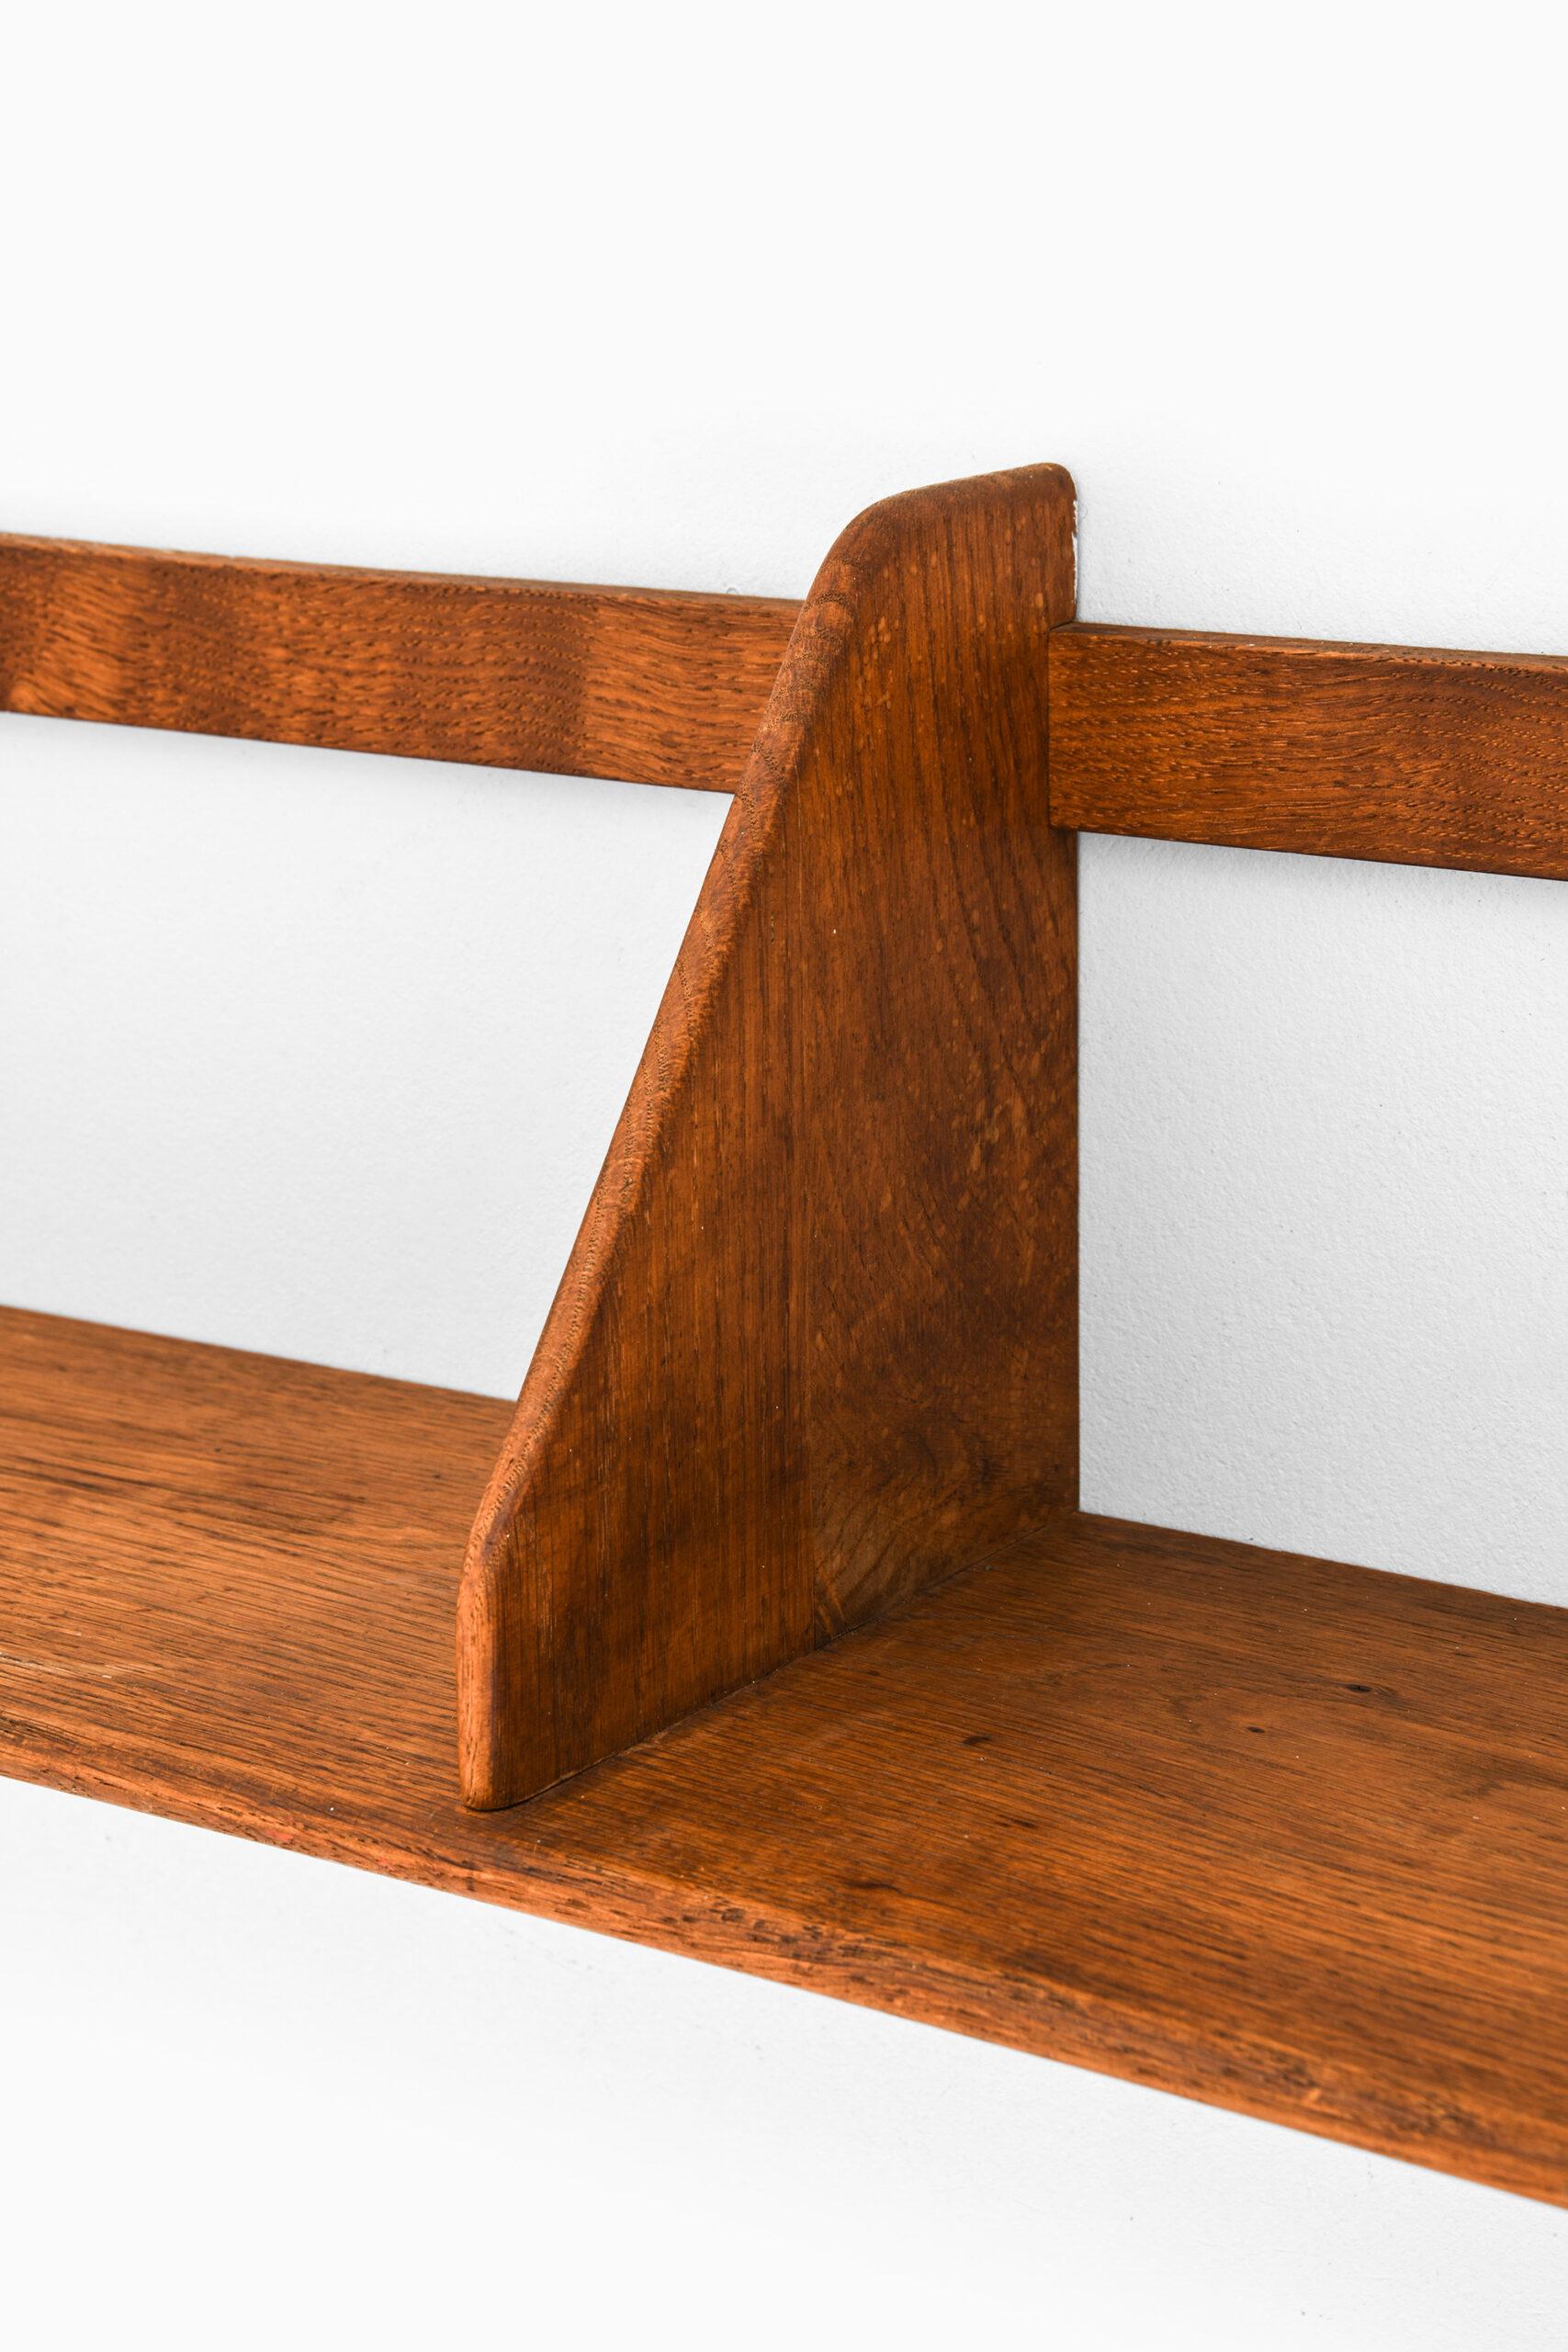 Wall mounted shelf designed by Hans Wegner. Produced by Ry Møbler in Denmark.